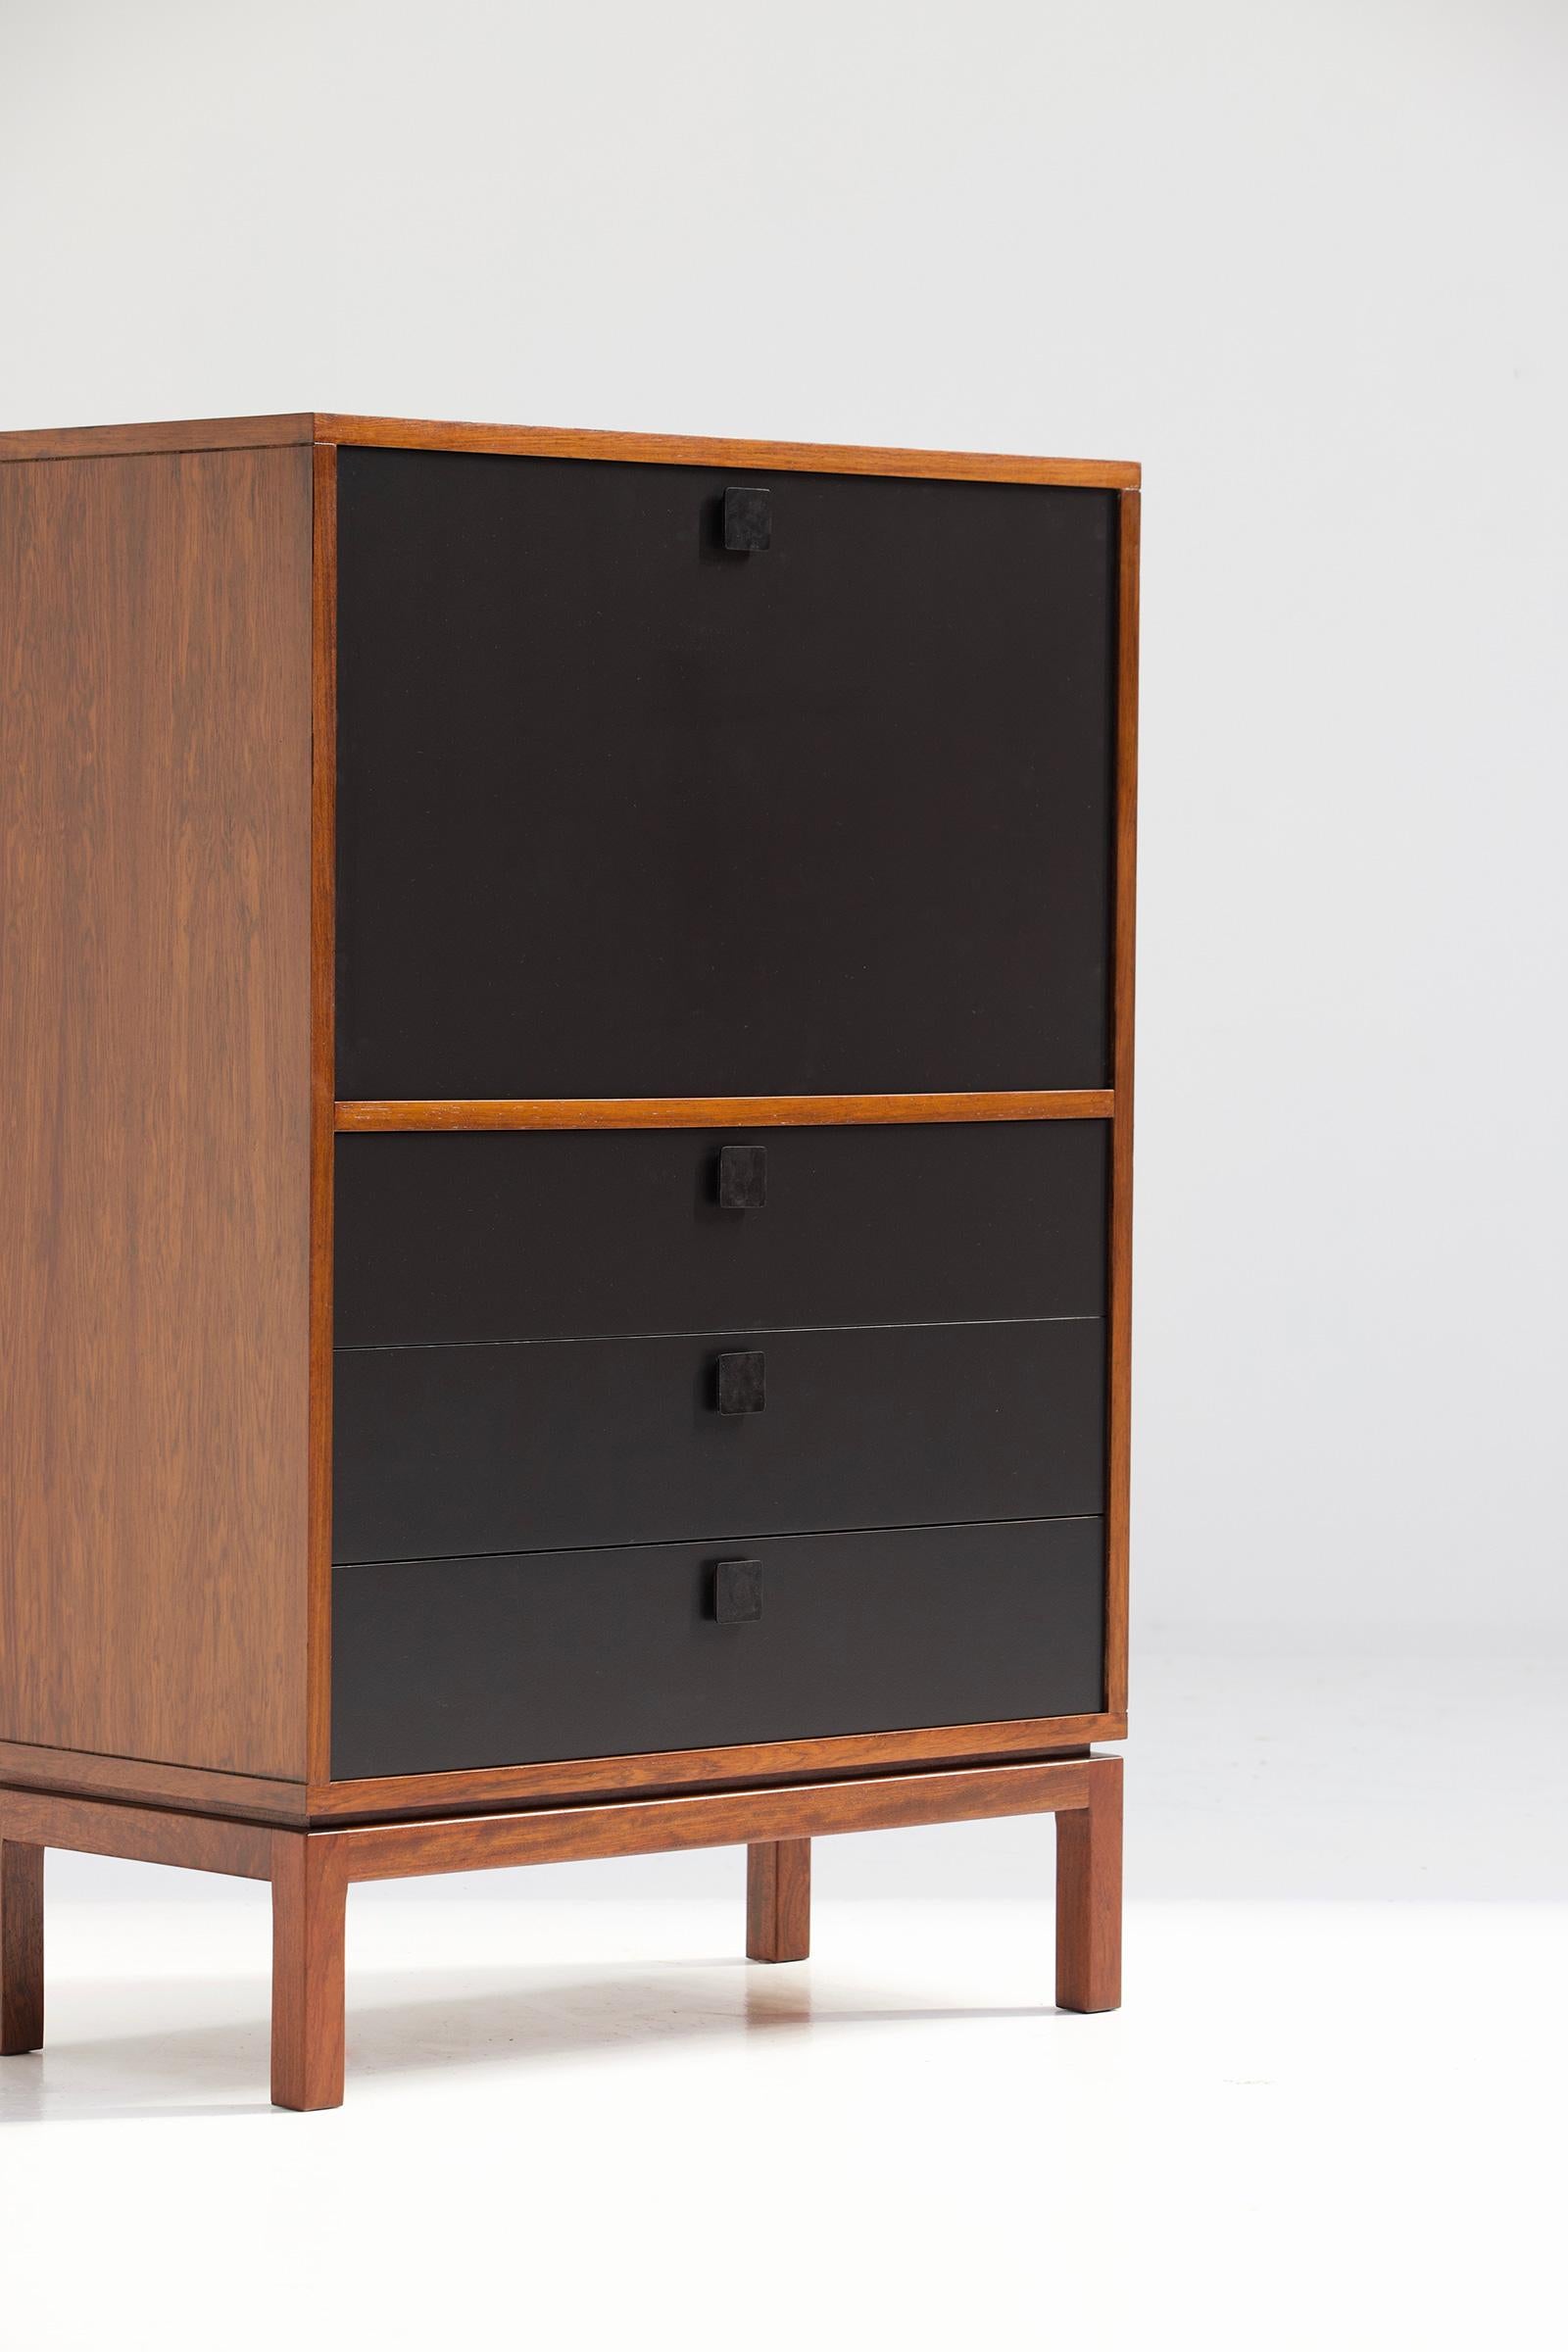 Writing desk, rosewood, black lacquer, Alfred Hendrickx, Belform, Belgium, 1960s

Alfred Hendrickx writing desk in palisander and black lacquered wood. The pull-out writing surface is in the same lacquered wood as the drawers. The inside is